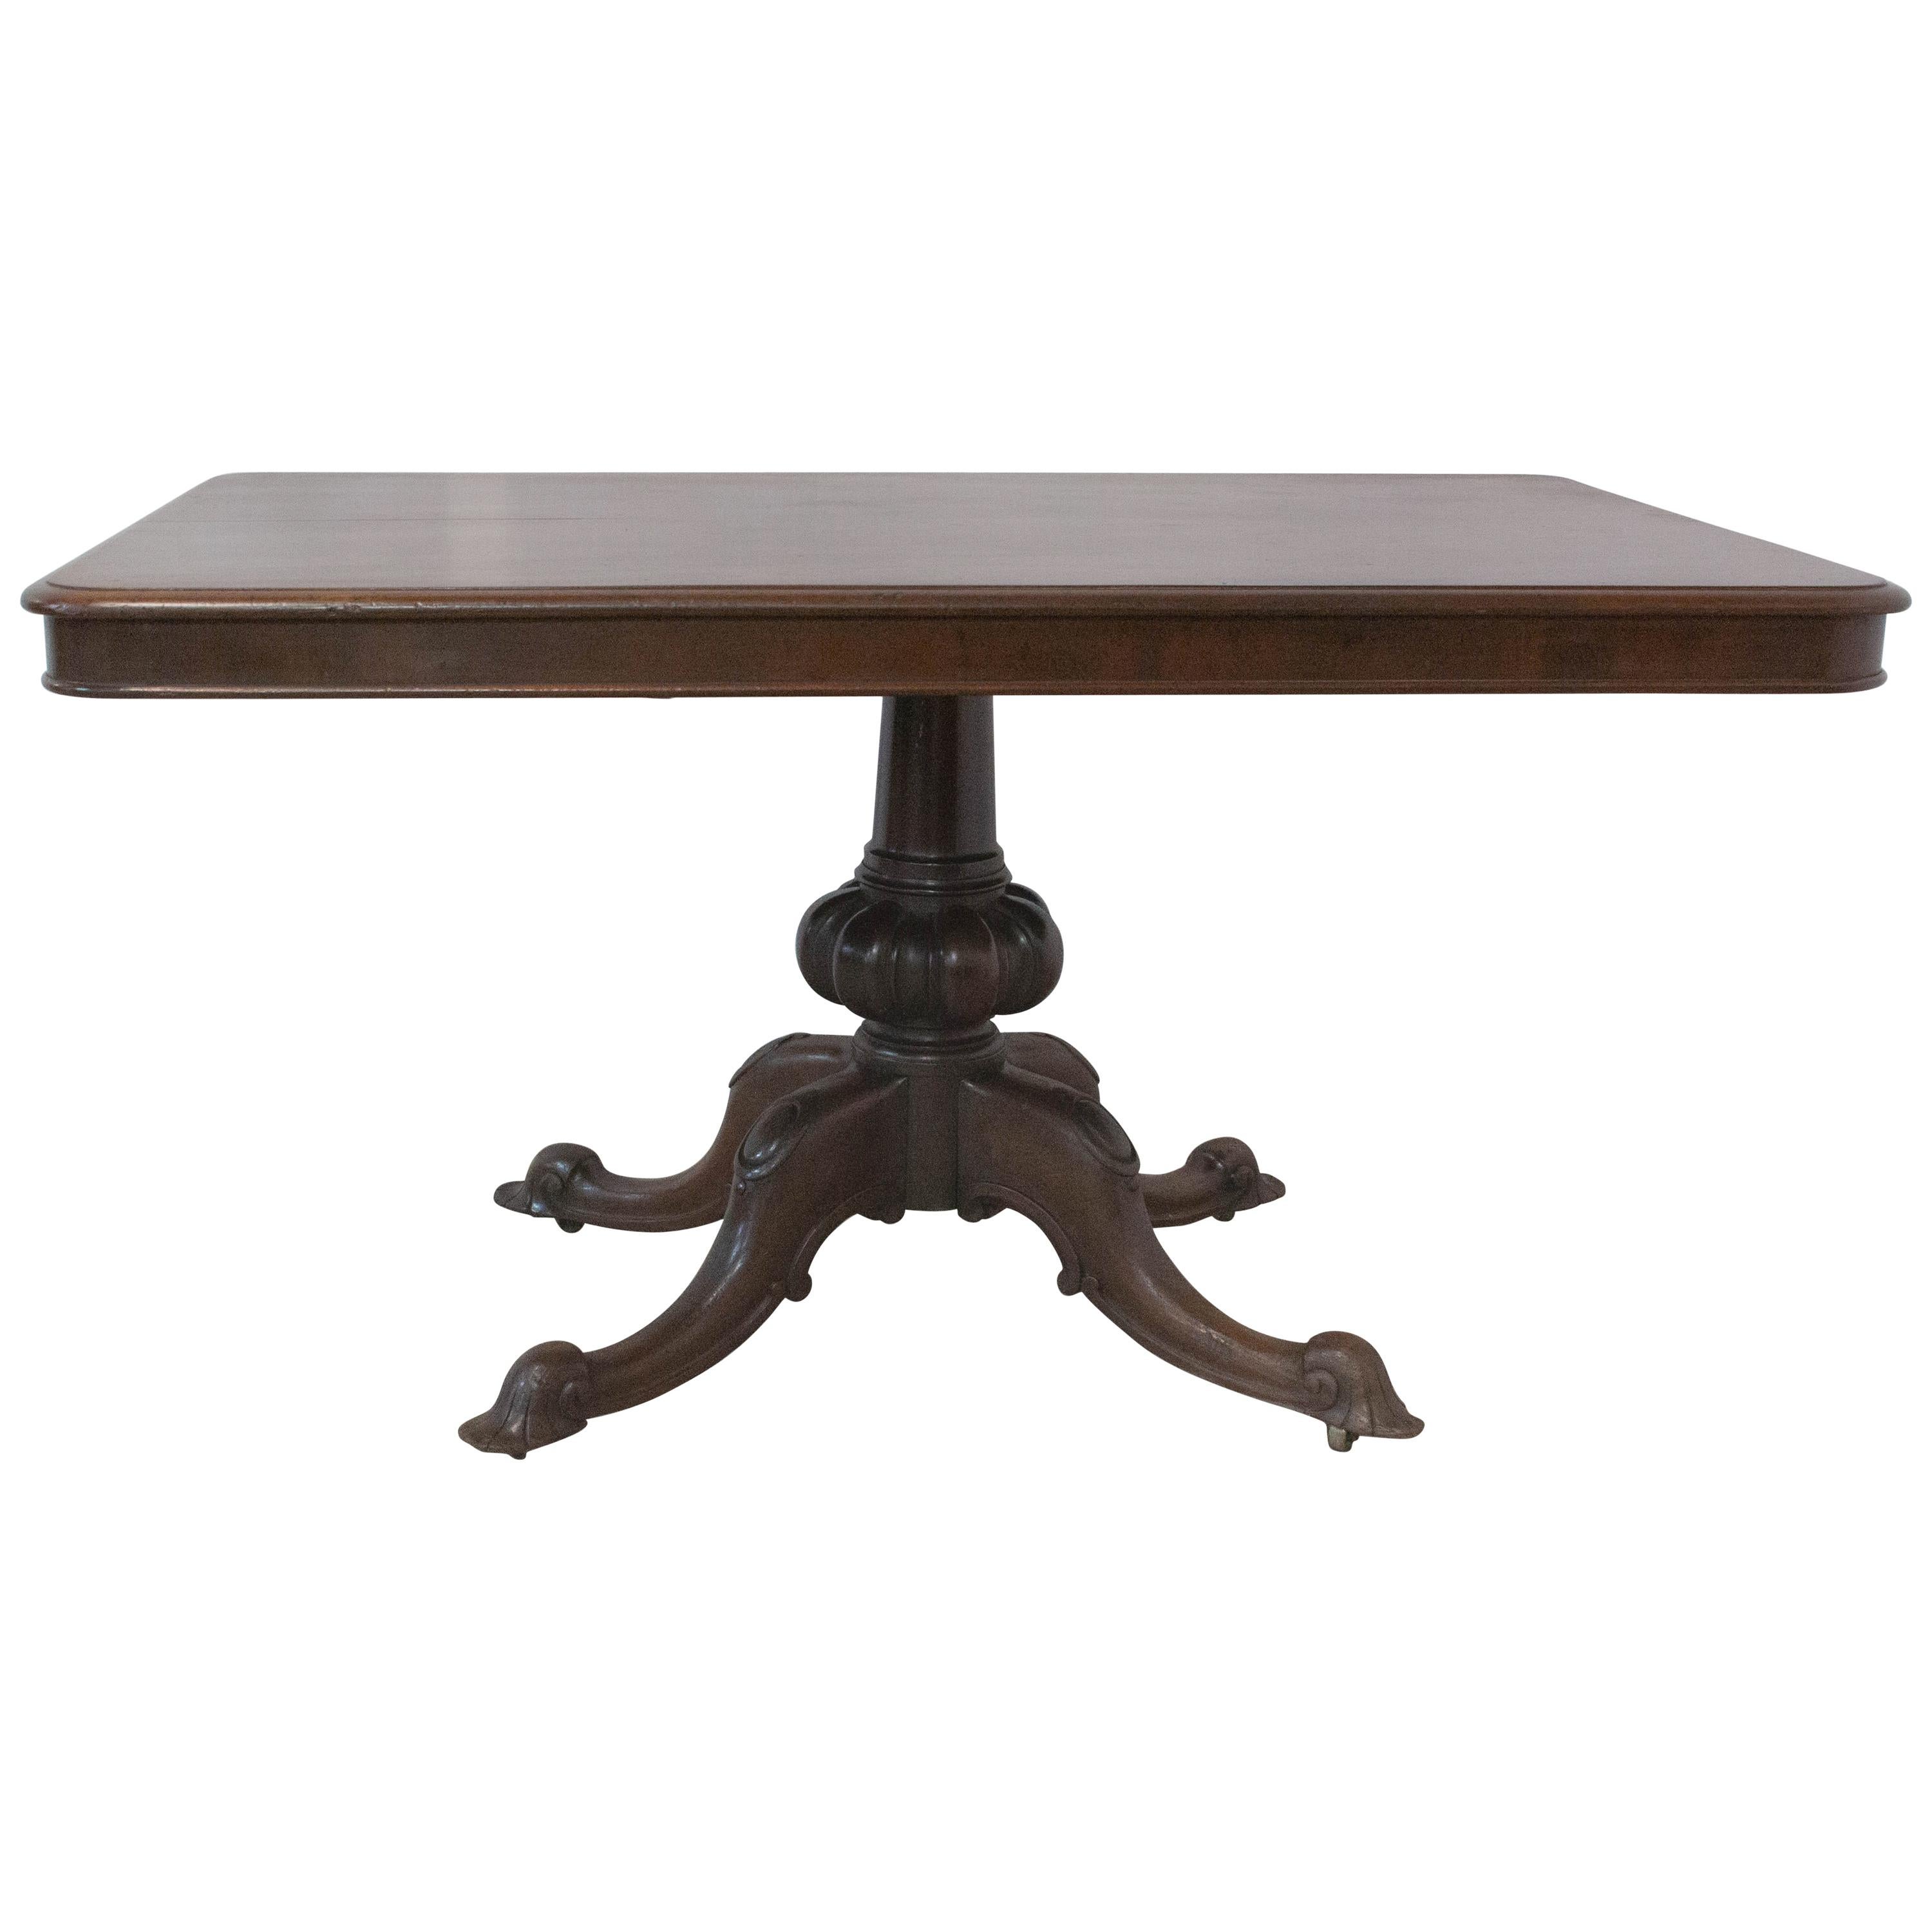 English 19th Century Dining Table Carved Exotic Wood, Tilt-Top Table